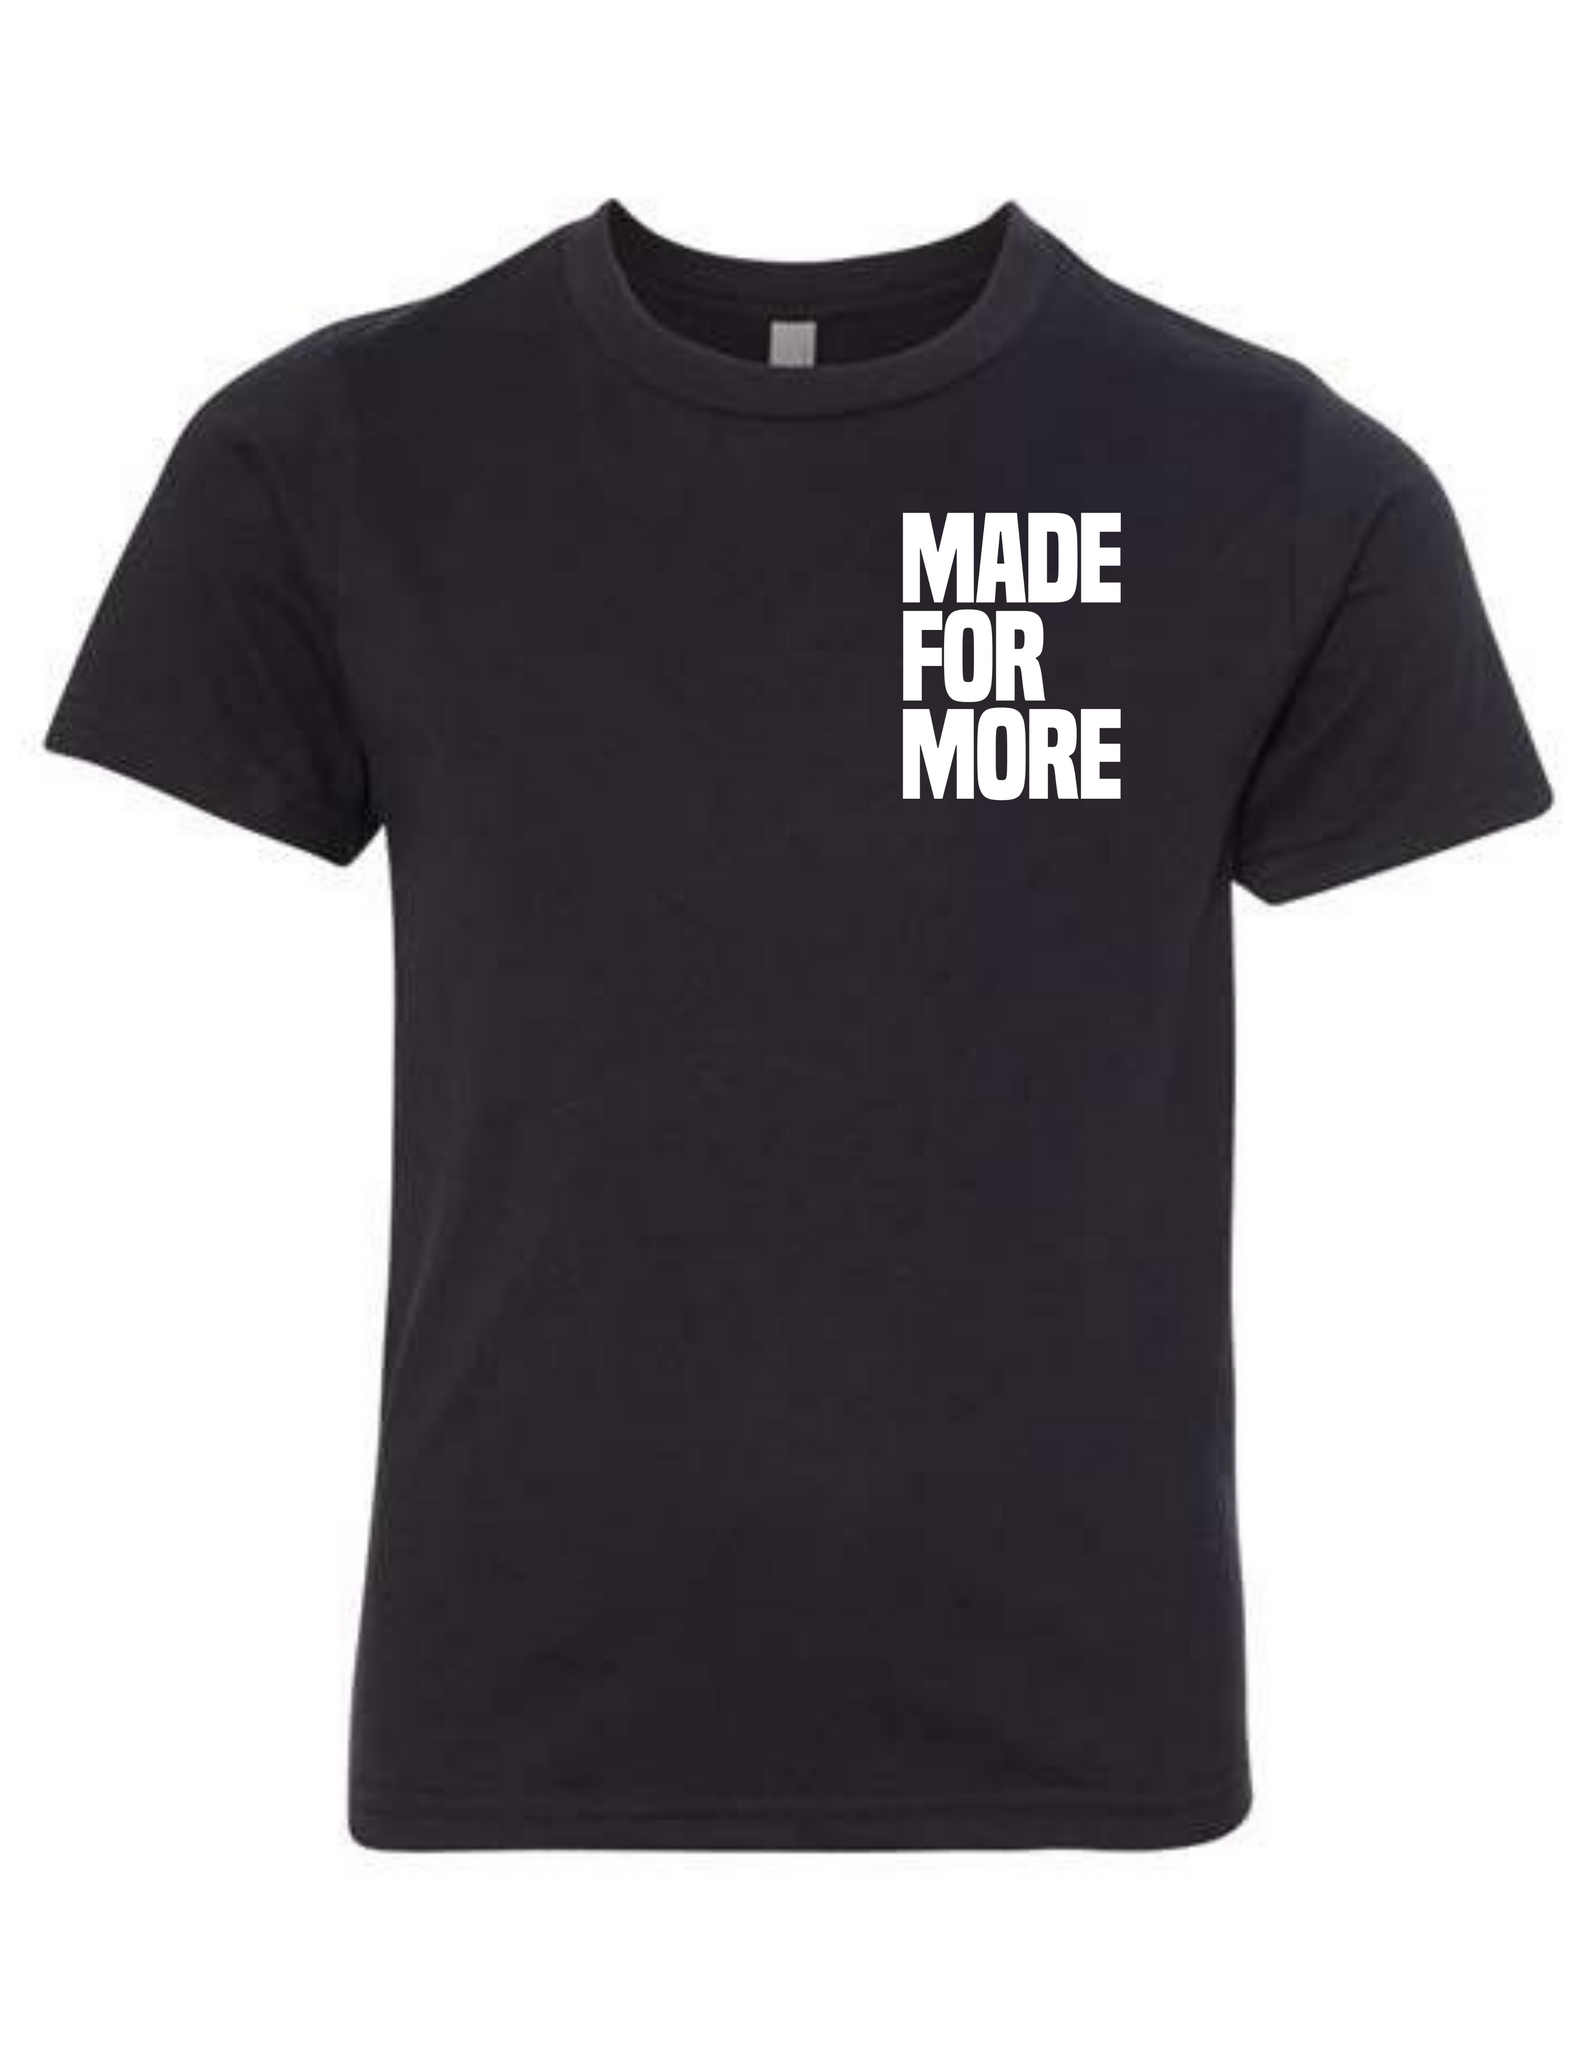 Youth “Made For More” T Shirt